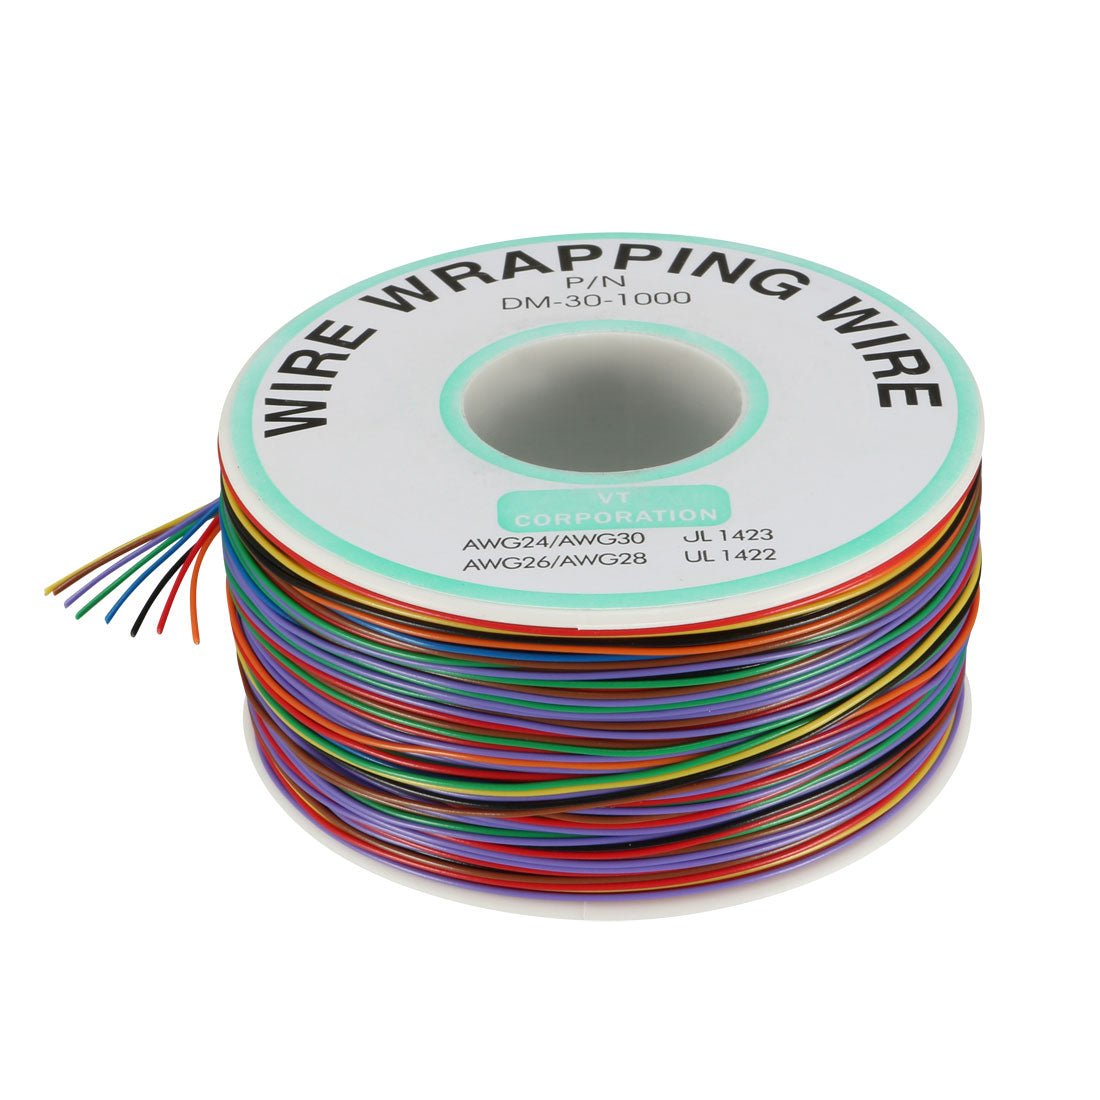 uxcell Uxcell Wrapping Wire Tin Plated Copper Wire P/N 30 AWG 250M Length 8 Colors